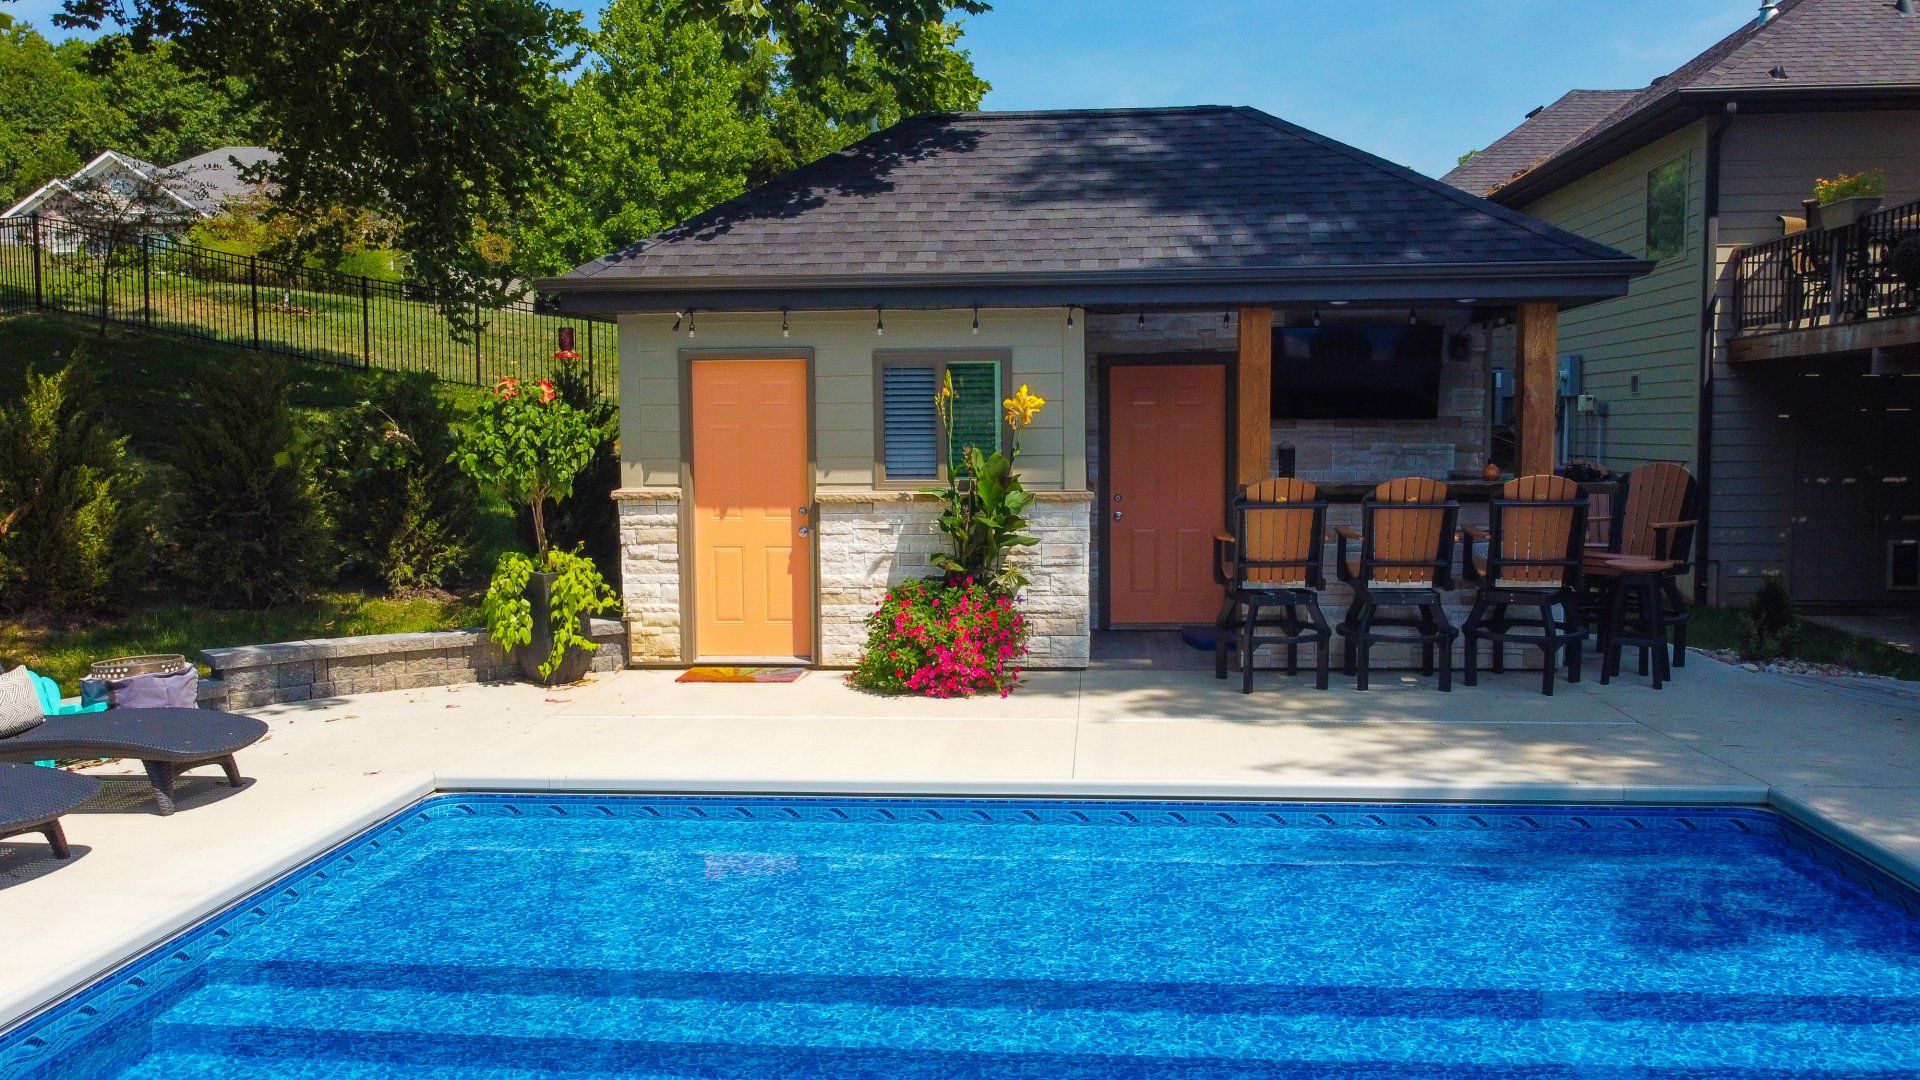 Pool Houses Can Protect Your Toys & Equipment. Contact the Pool Builders at Peavler Construction.